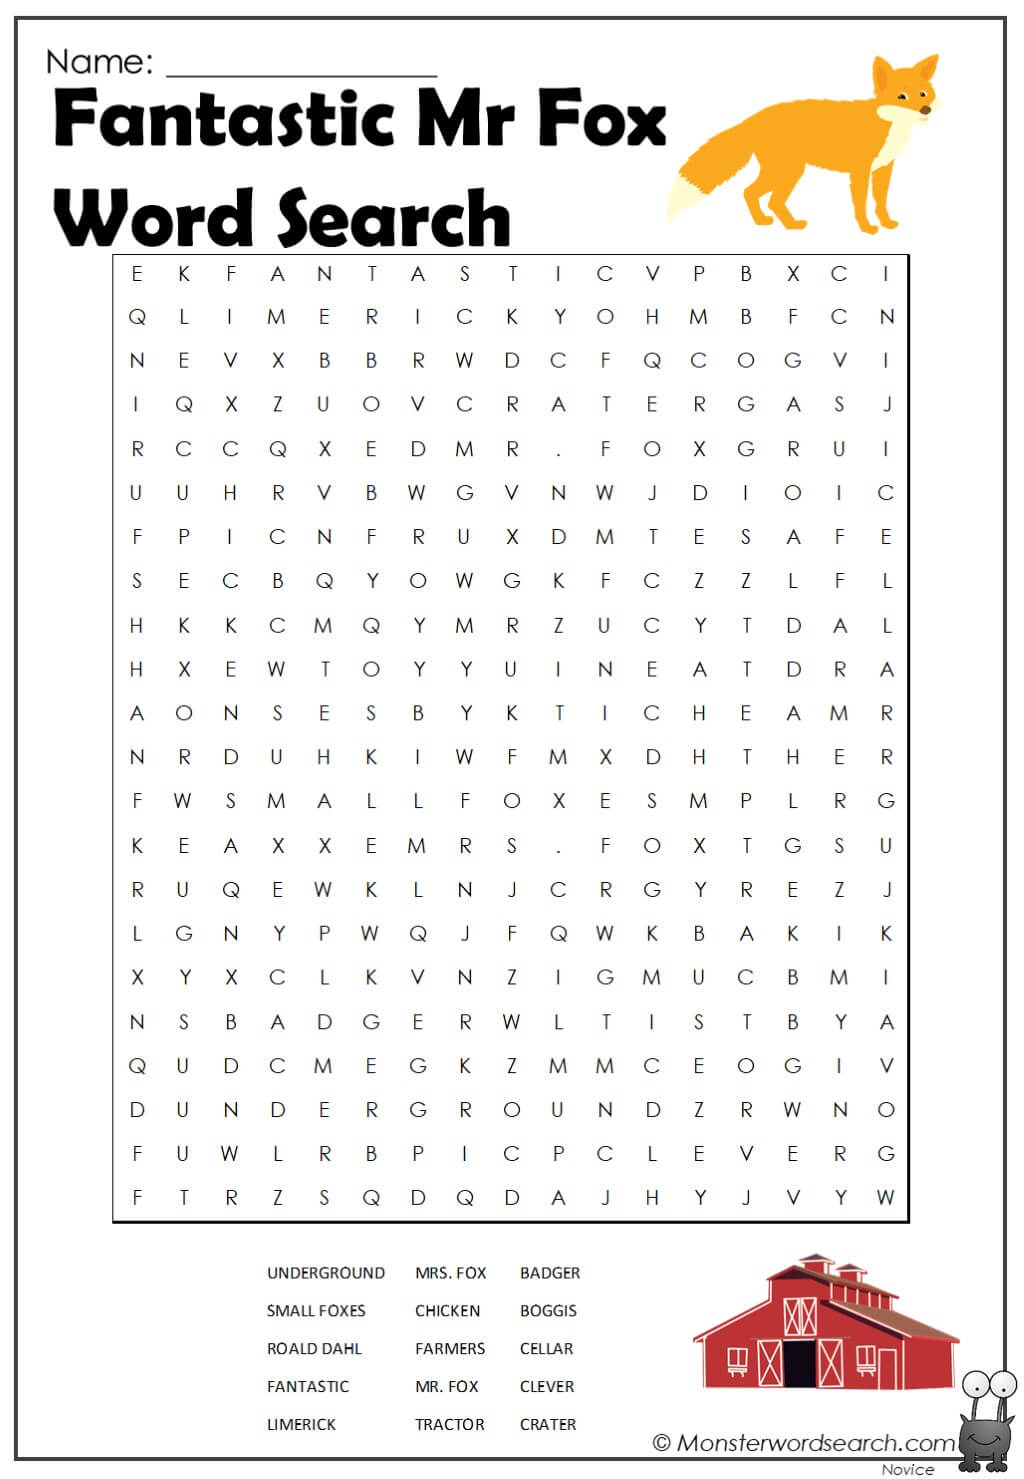 fantastic-mr-fox-word-search-monster-word-search